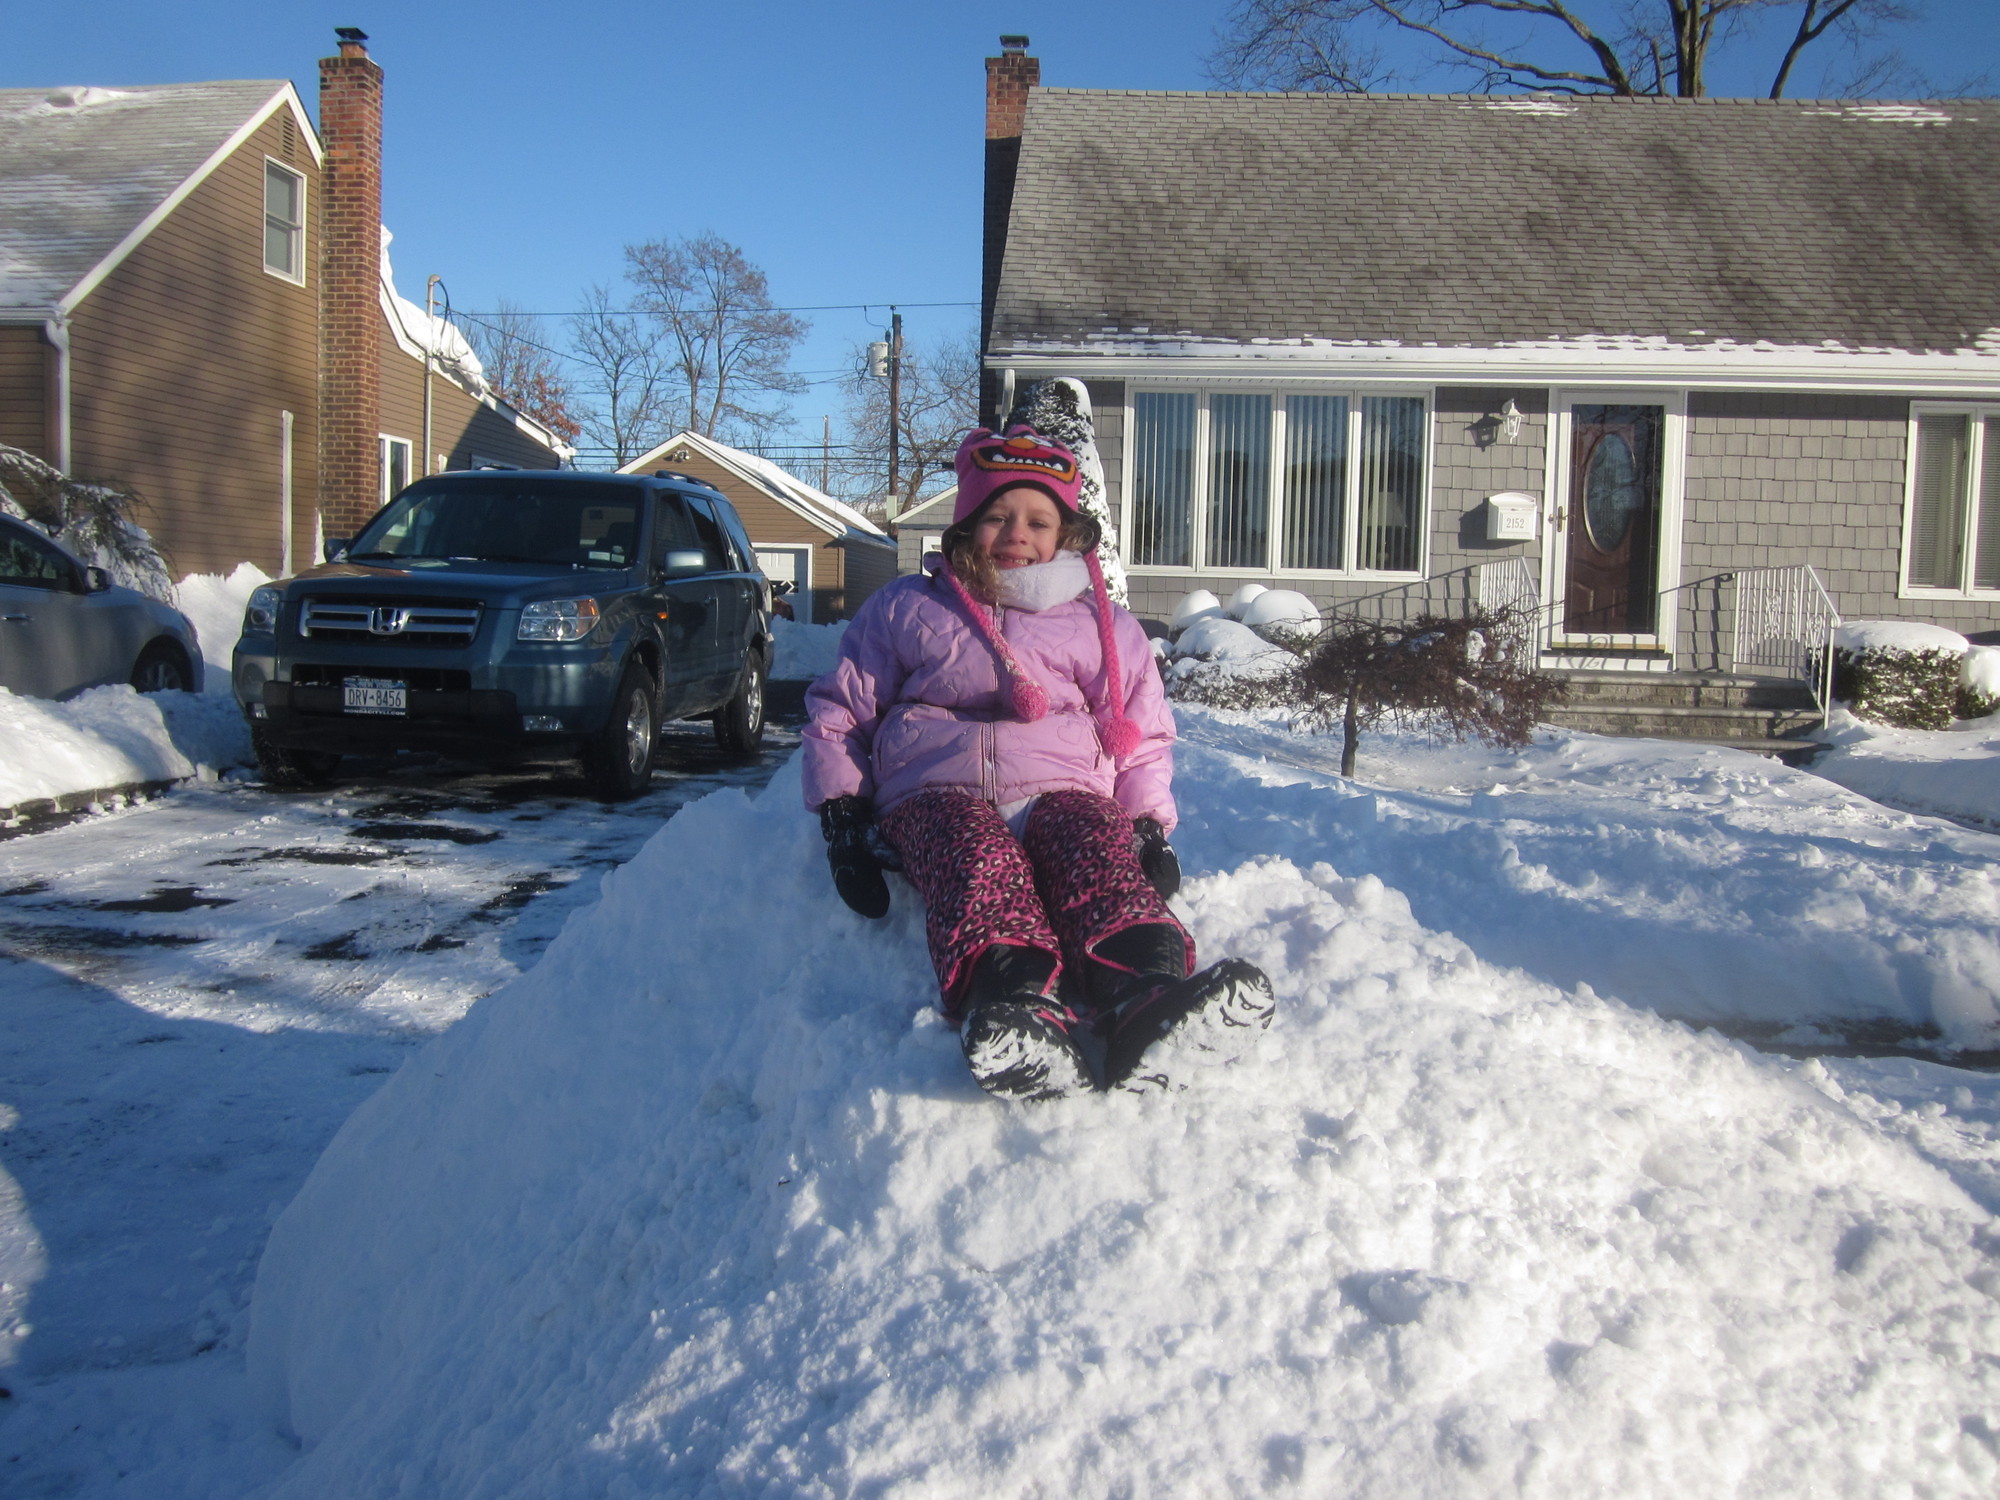 Lila Doyle, 4, said her favorite snow activity is making snow angels.